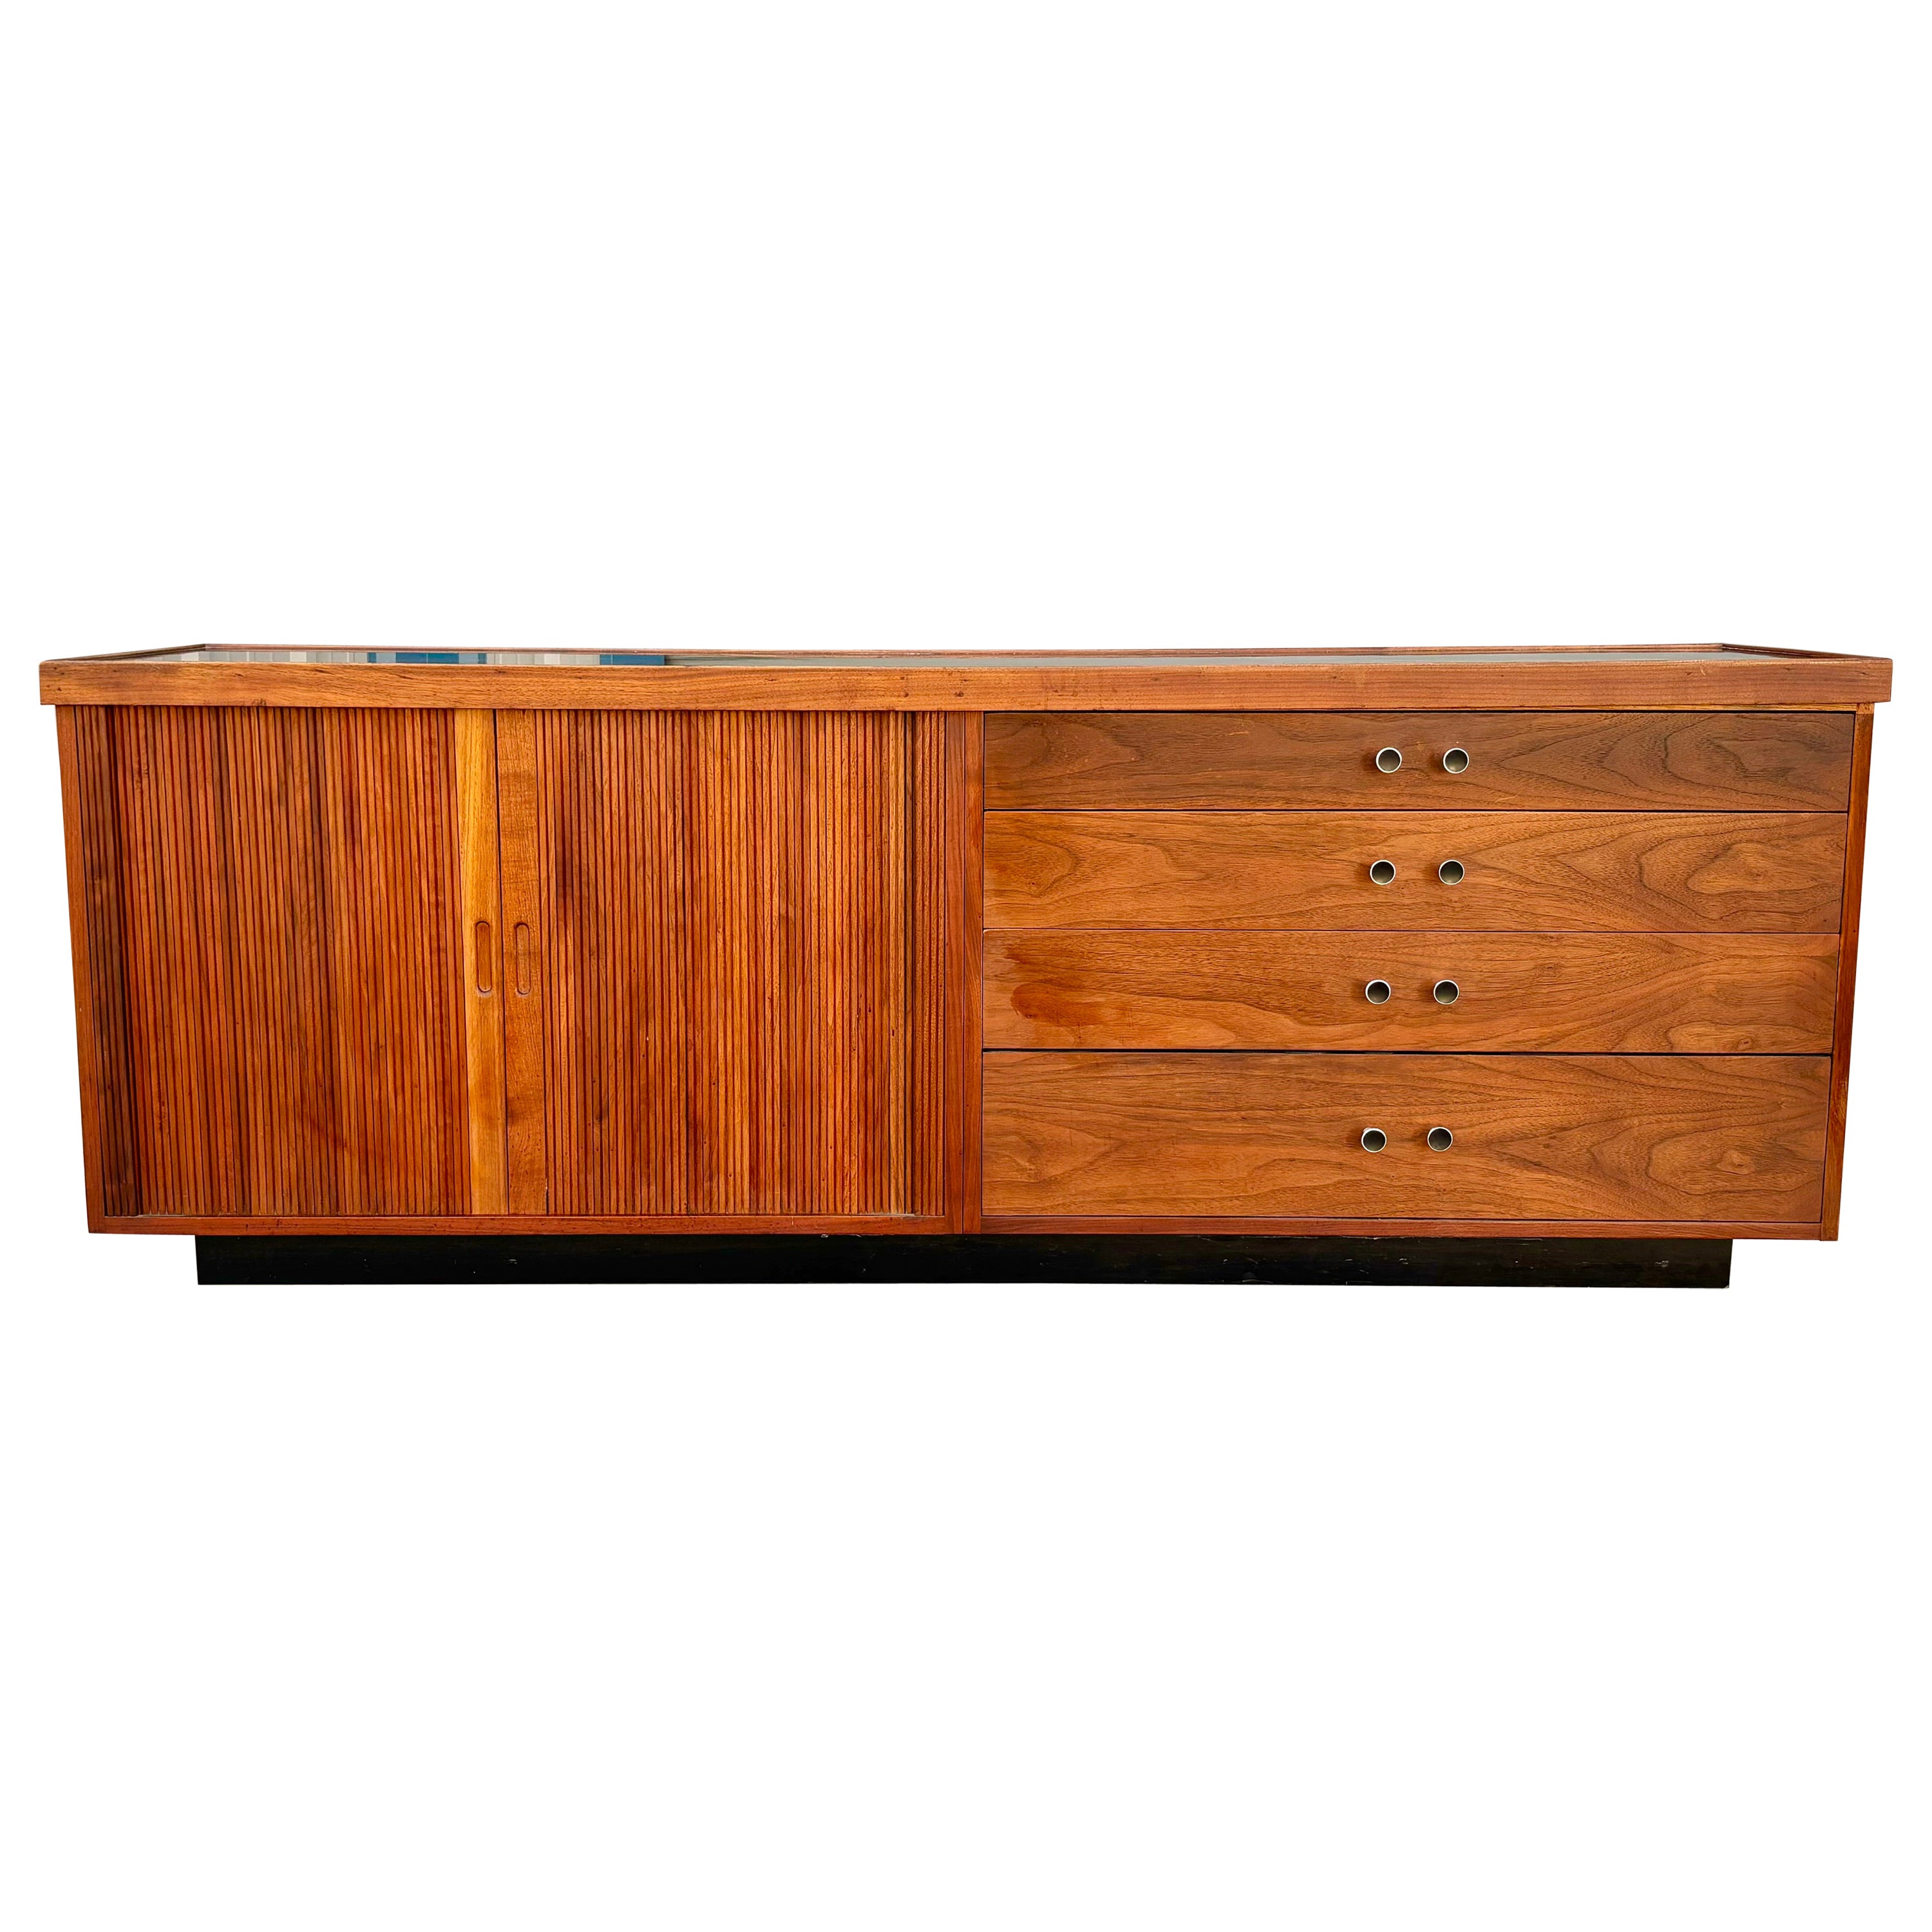 1950s Mid Century Tambour Door Credenza by Glenn of California For Sale